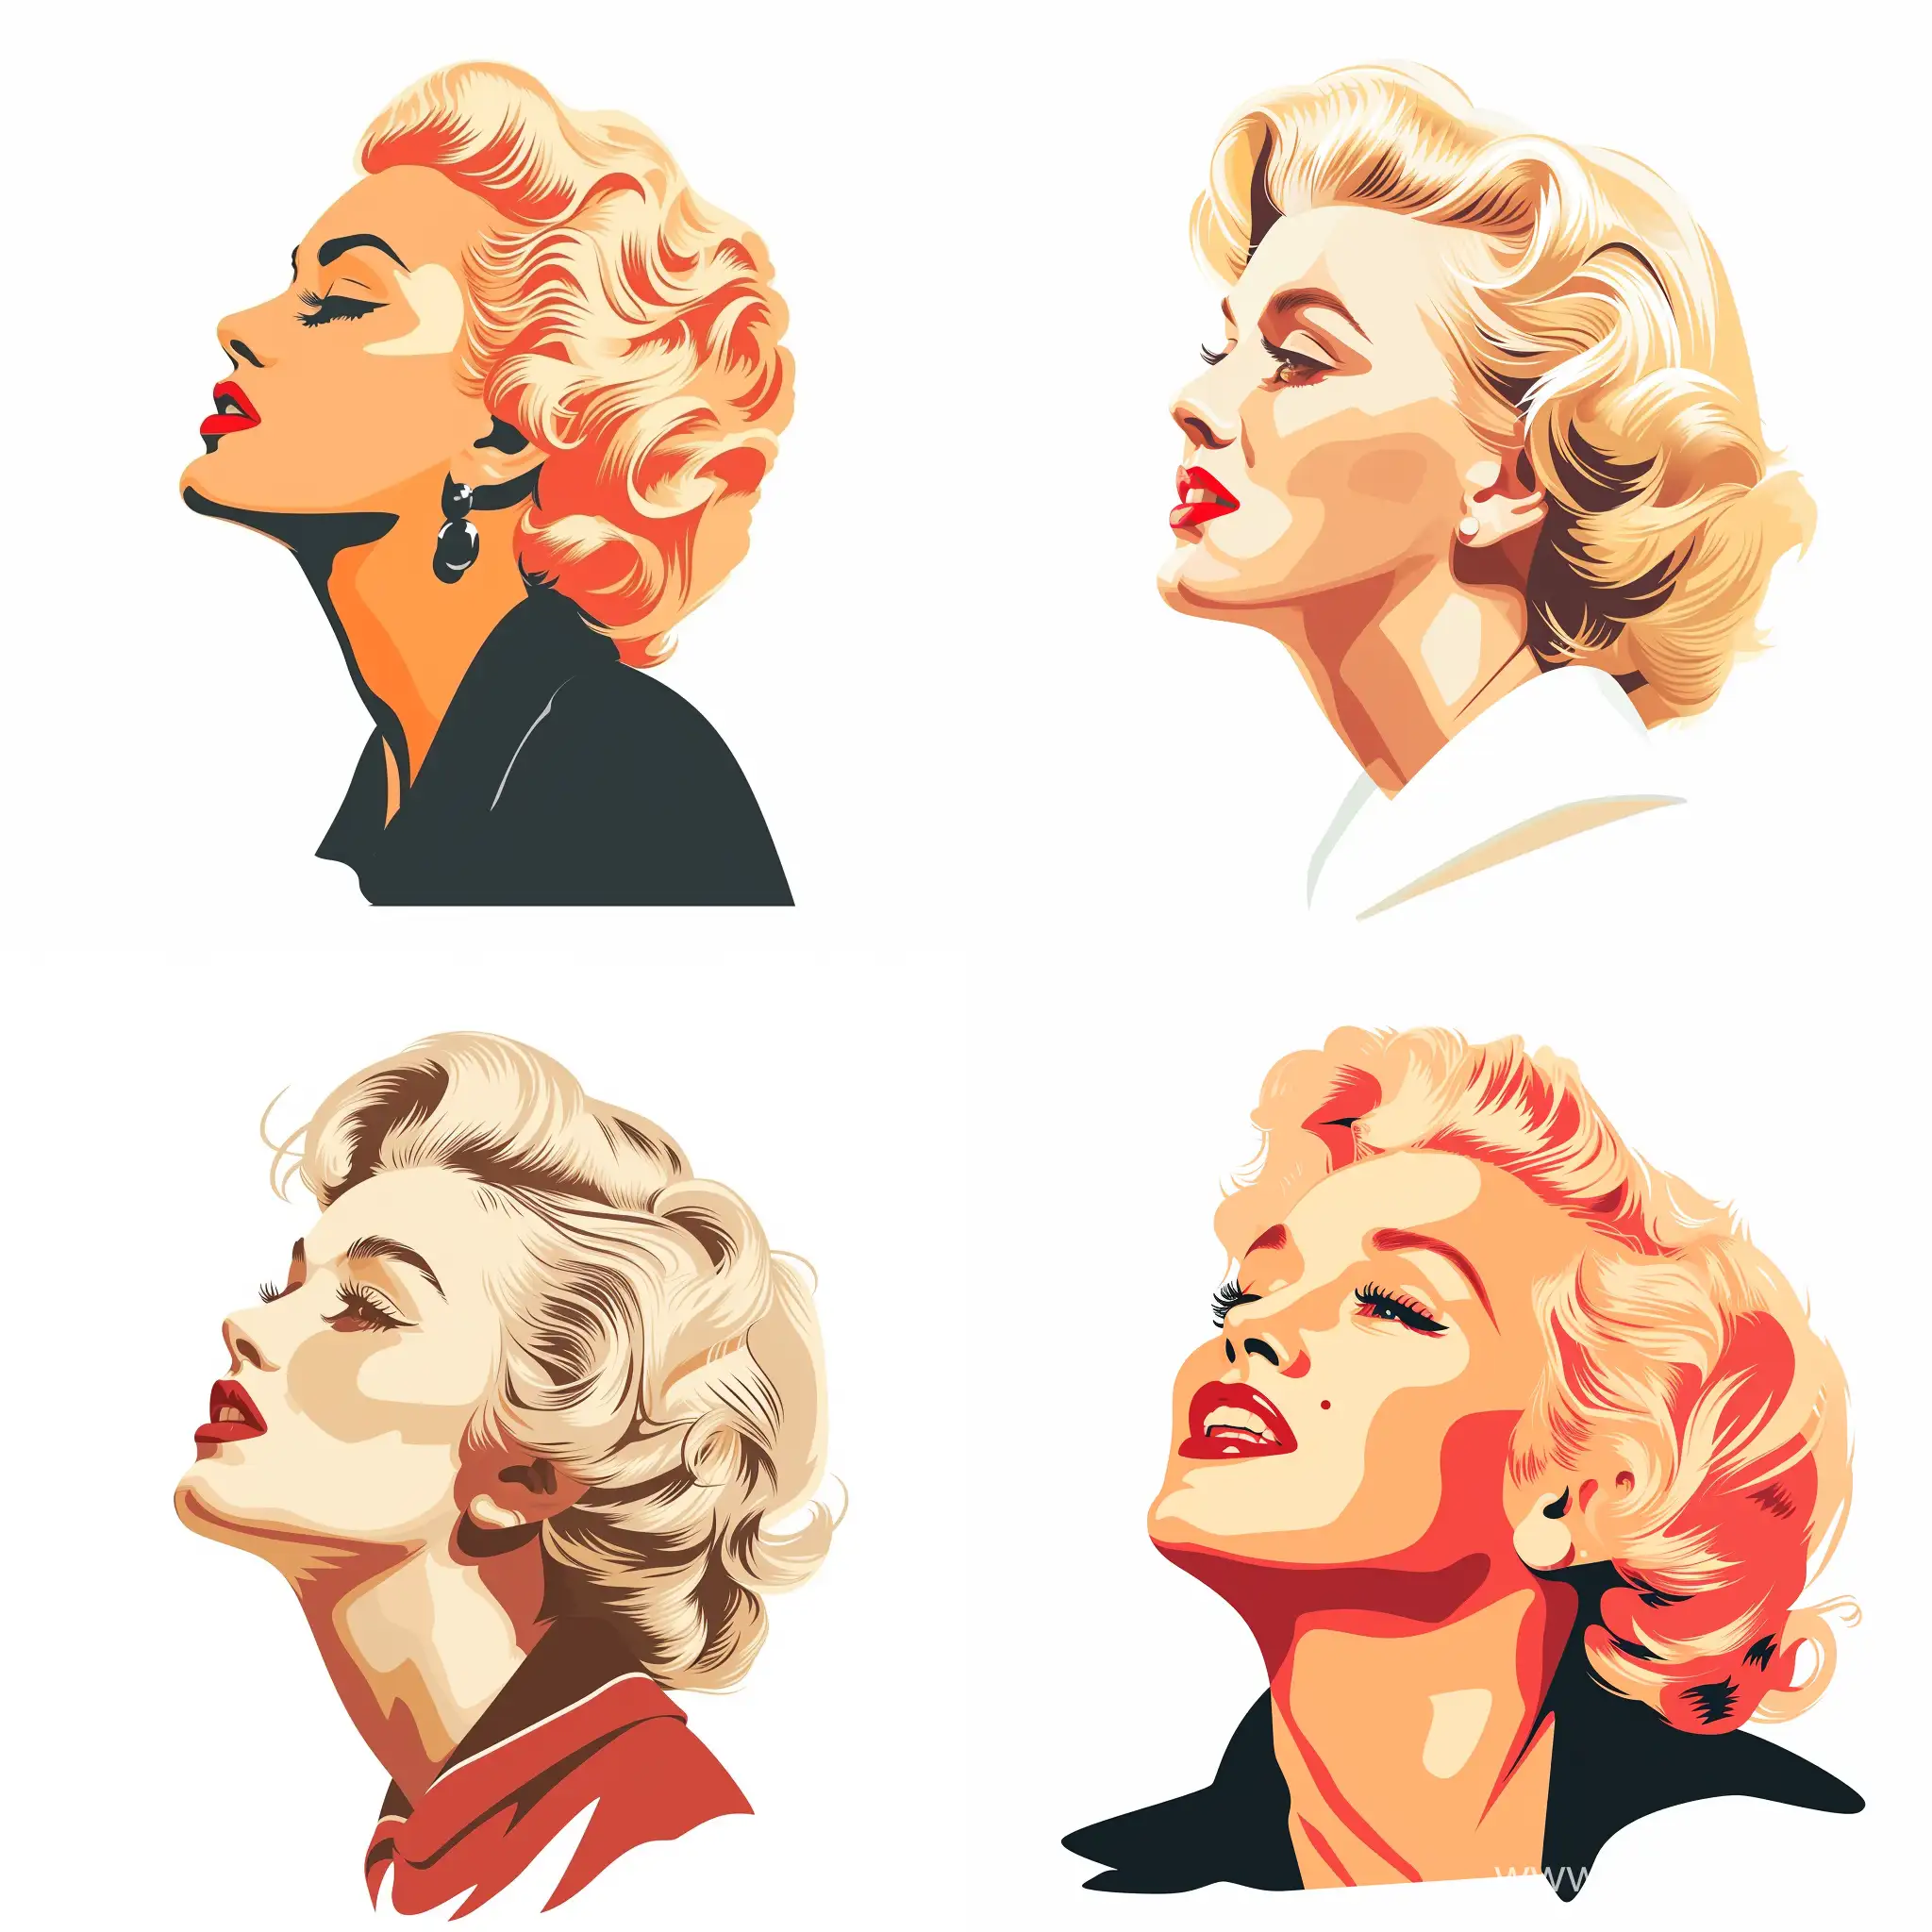 Profile-Portrait-of-Marilyn-Monroe-Illustration-in-Victoria-Ngai-Style